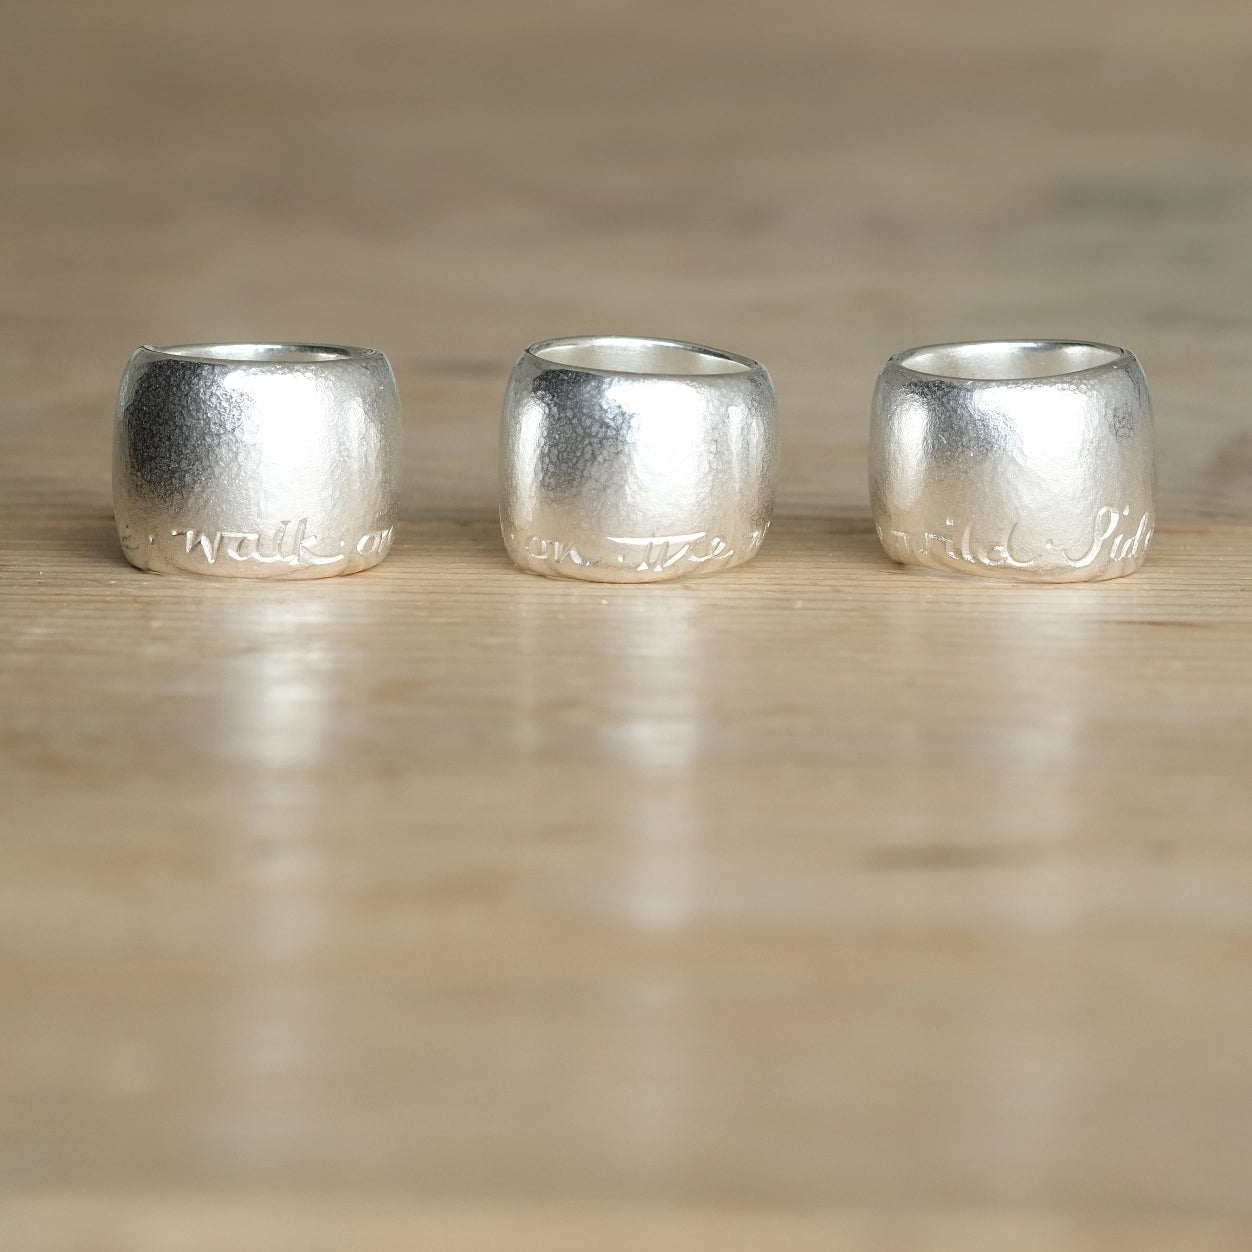 Walk on the Wild Side rings. Silver. 3 rings each turned to a position so the phrase Walk On The Wild Side can be read